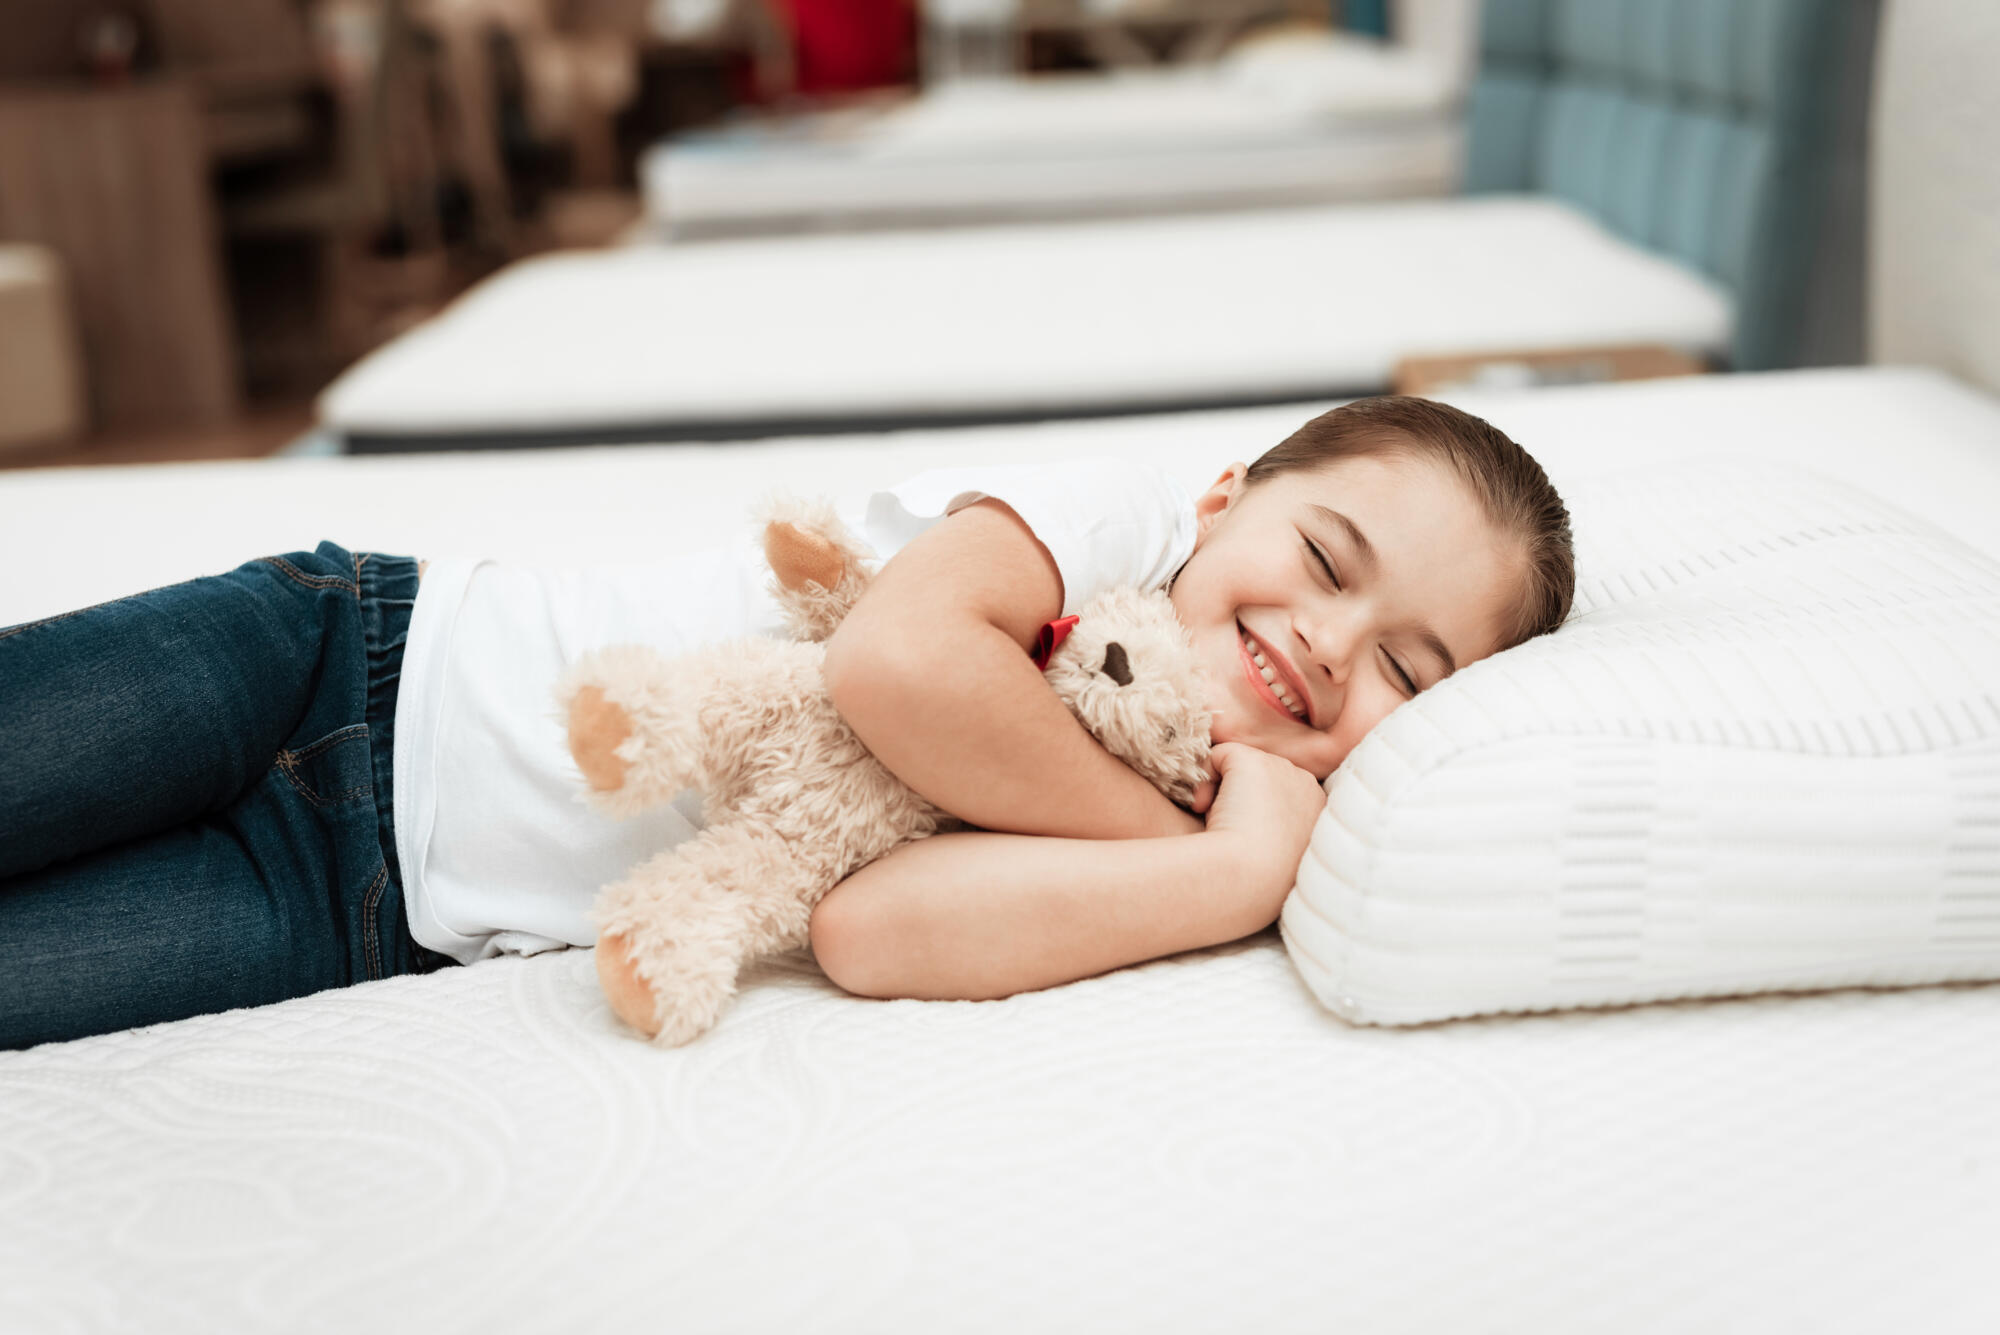 A young girl sleeping on a mattress with a teddy bear explores 6 Things To Consider When Buying A New Mattress For Your Kids.